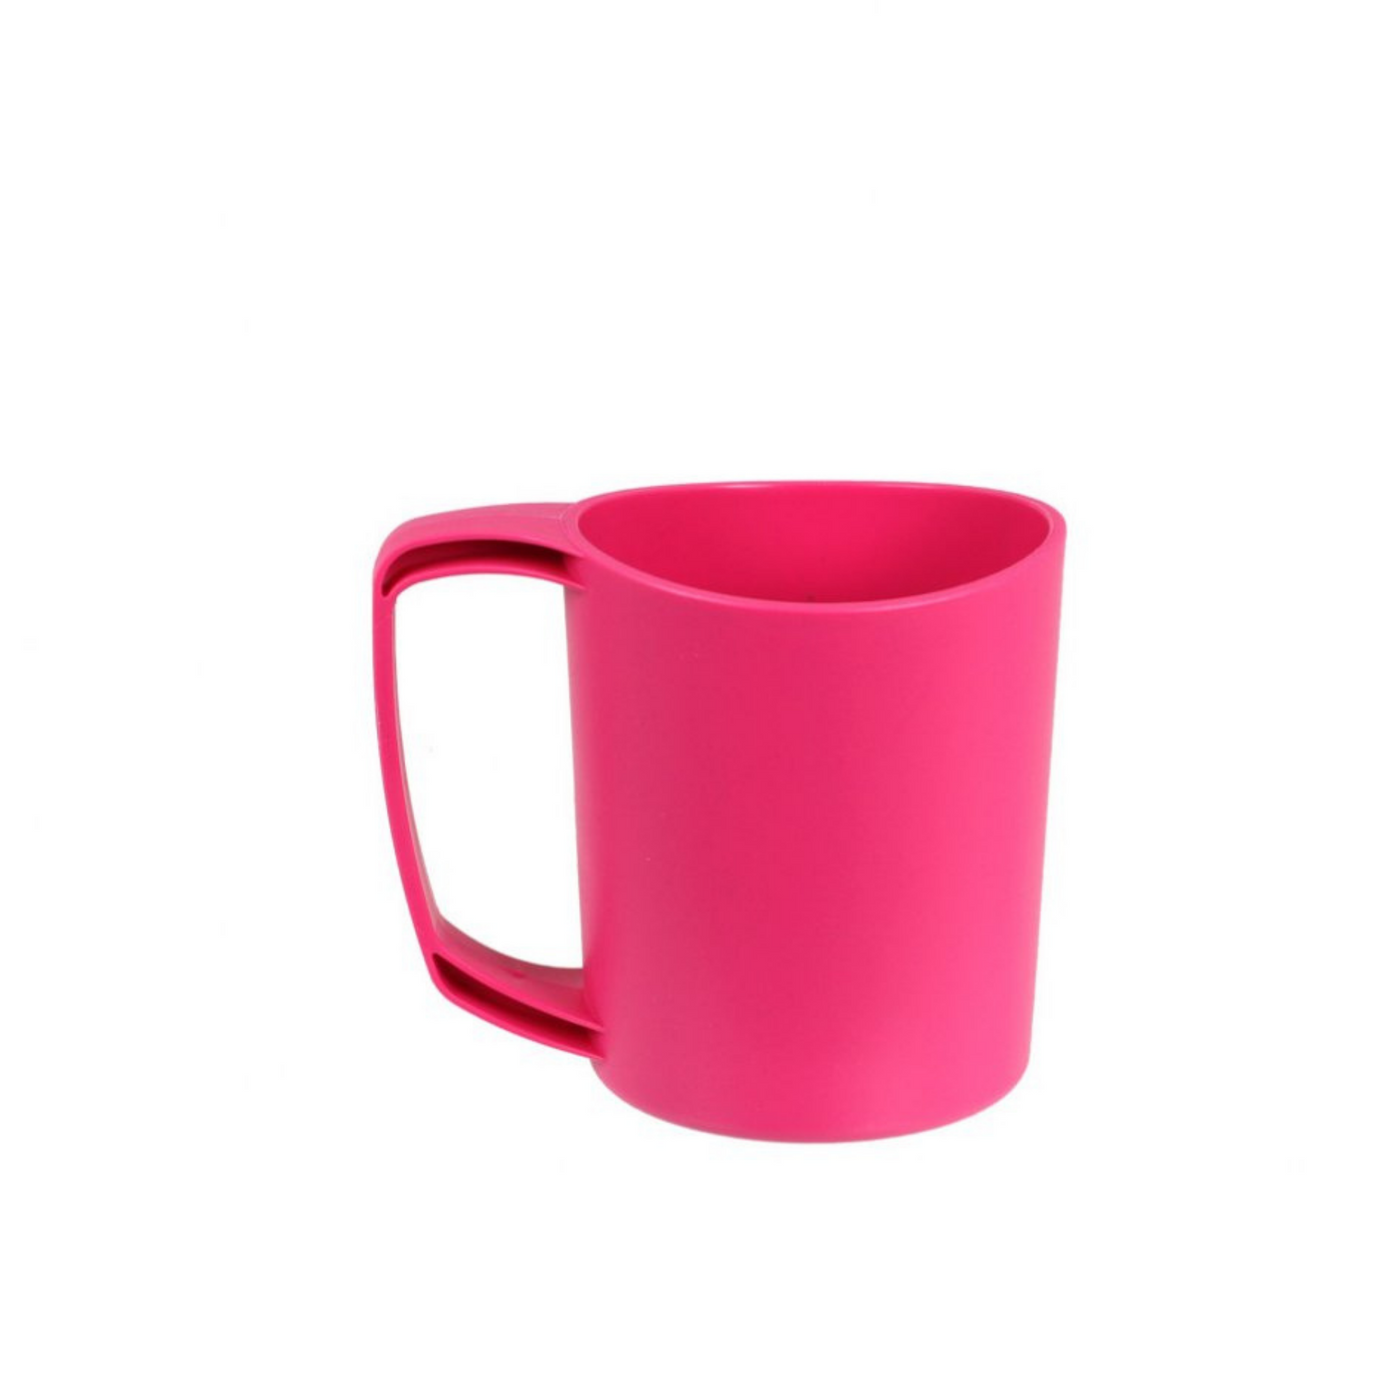 Lifeventure Ellipse Mug | Camping and Hiking Cookware | Further Faster Christchurch NZ #pink